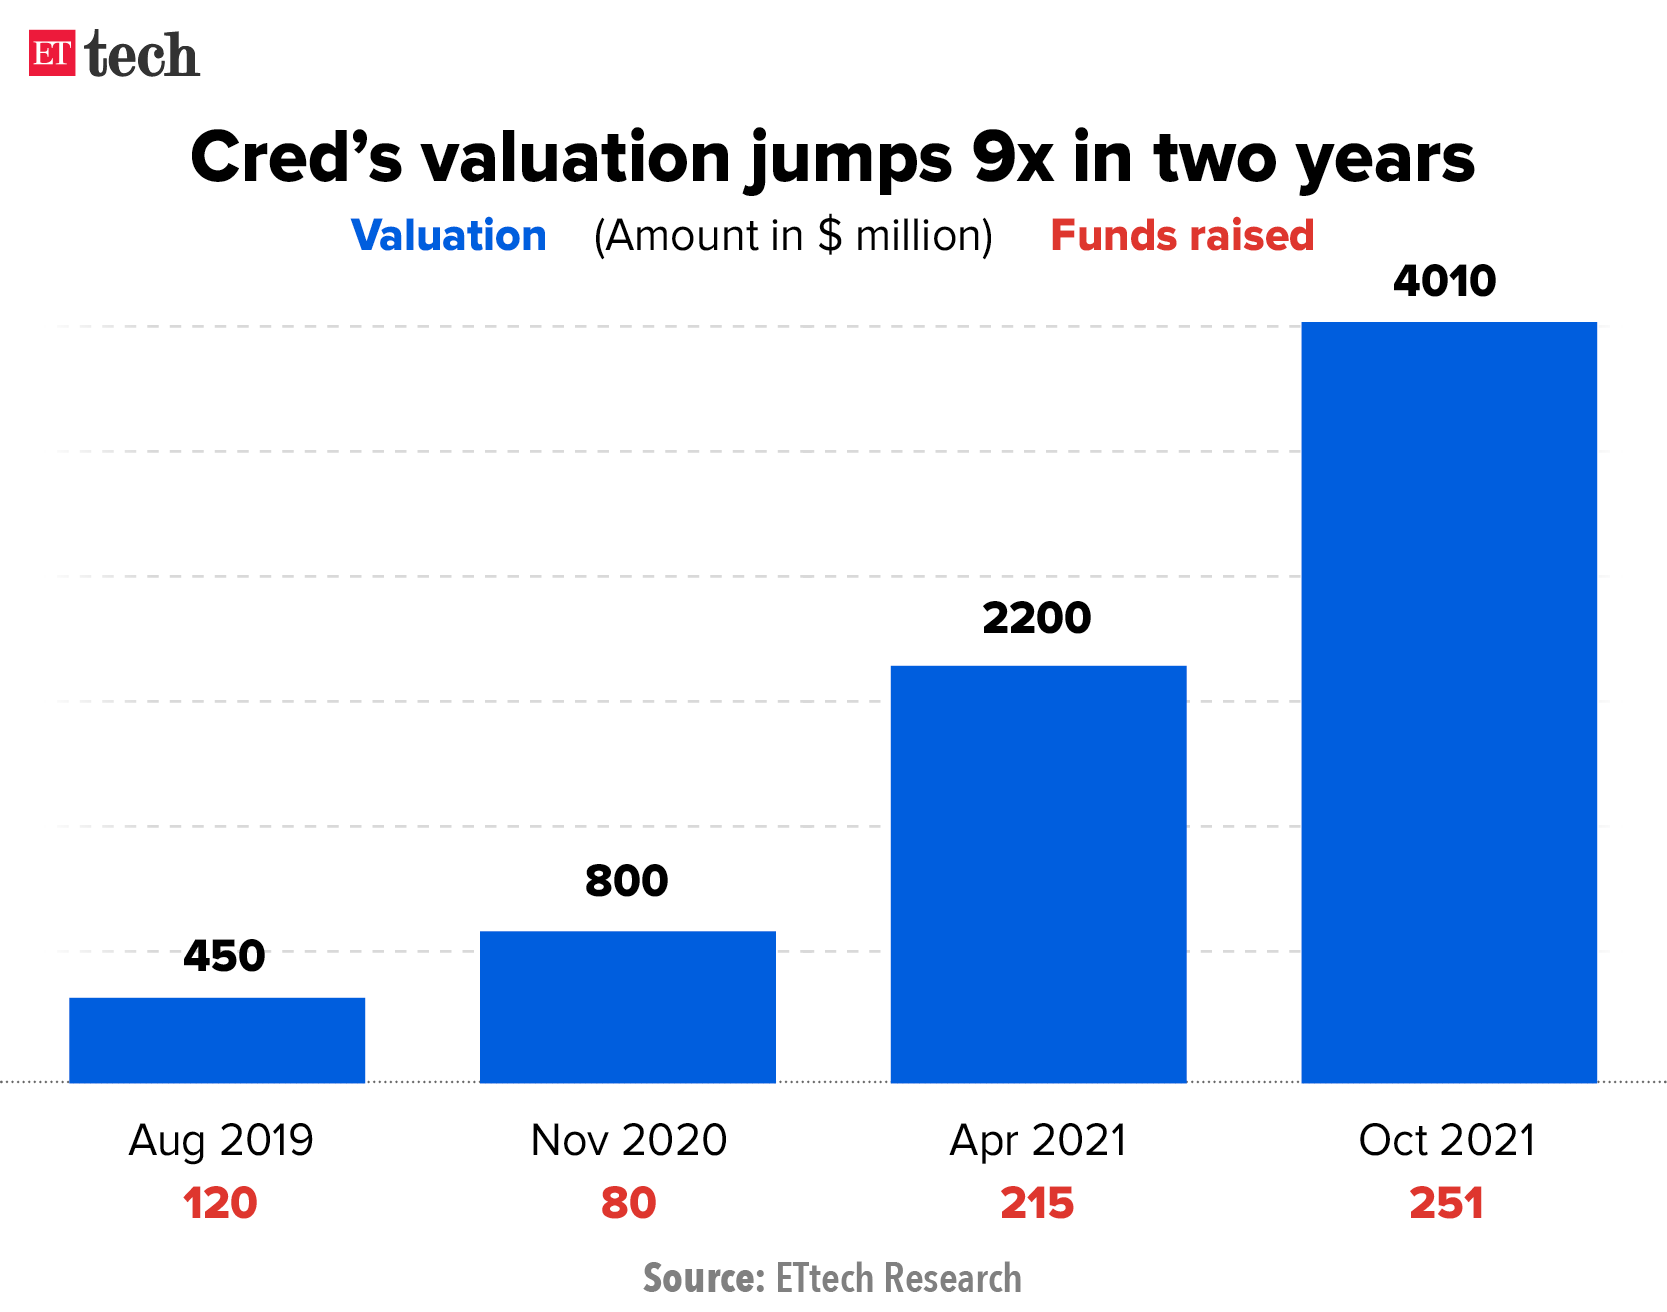 Cred’s valuation jumps 9x in two years